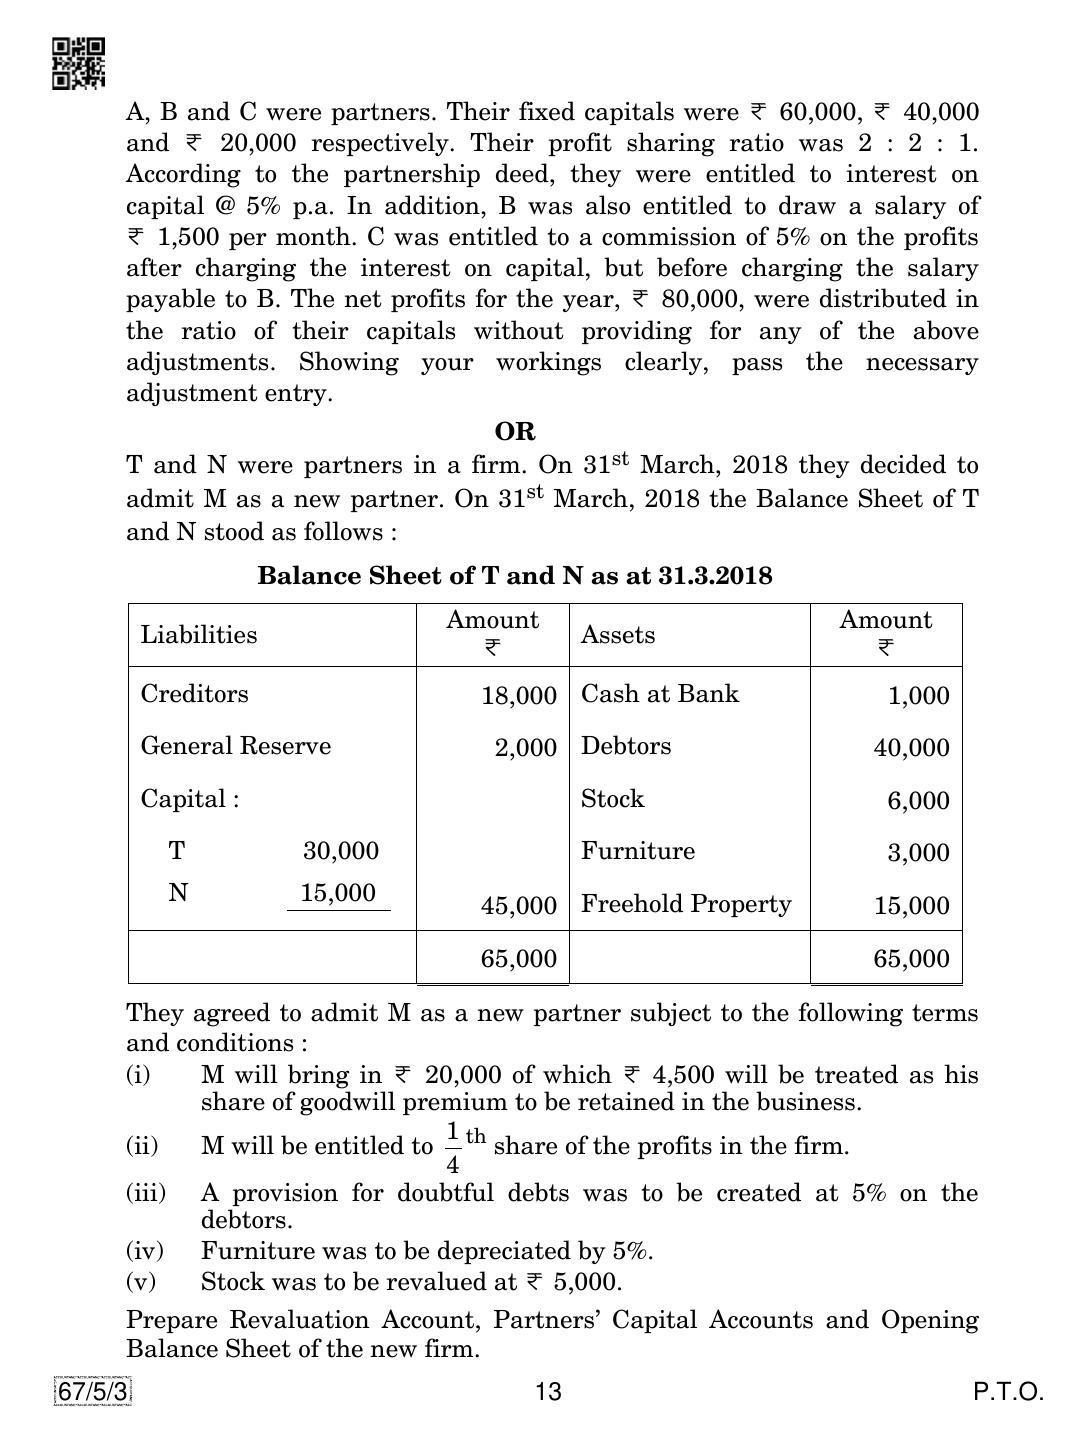 CBSE Class 12 67-5-3 Accountancy 2019 Question Paper - Page 13